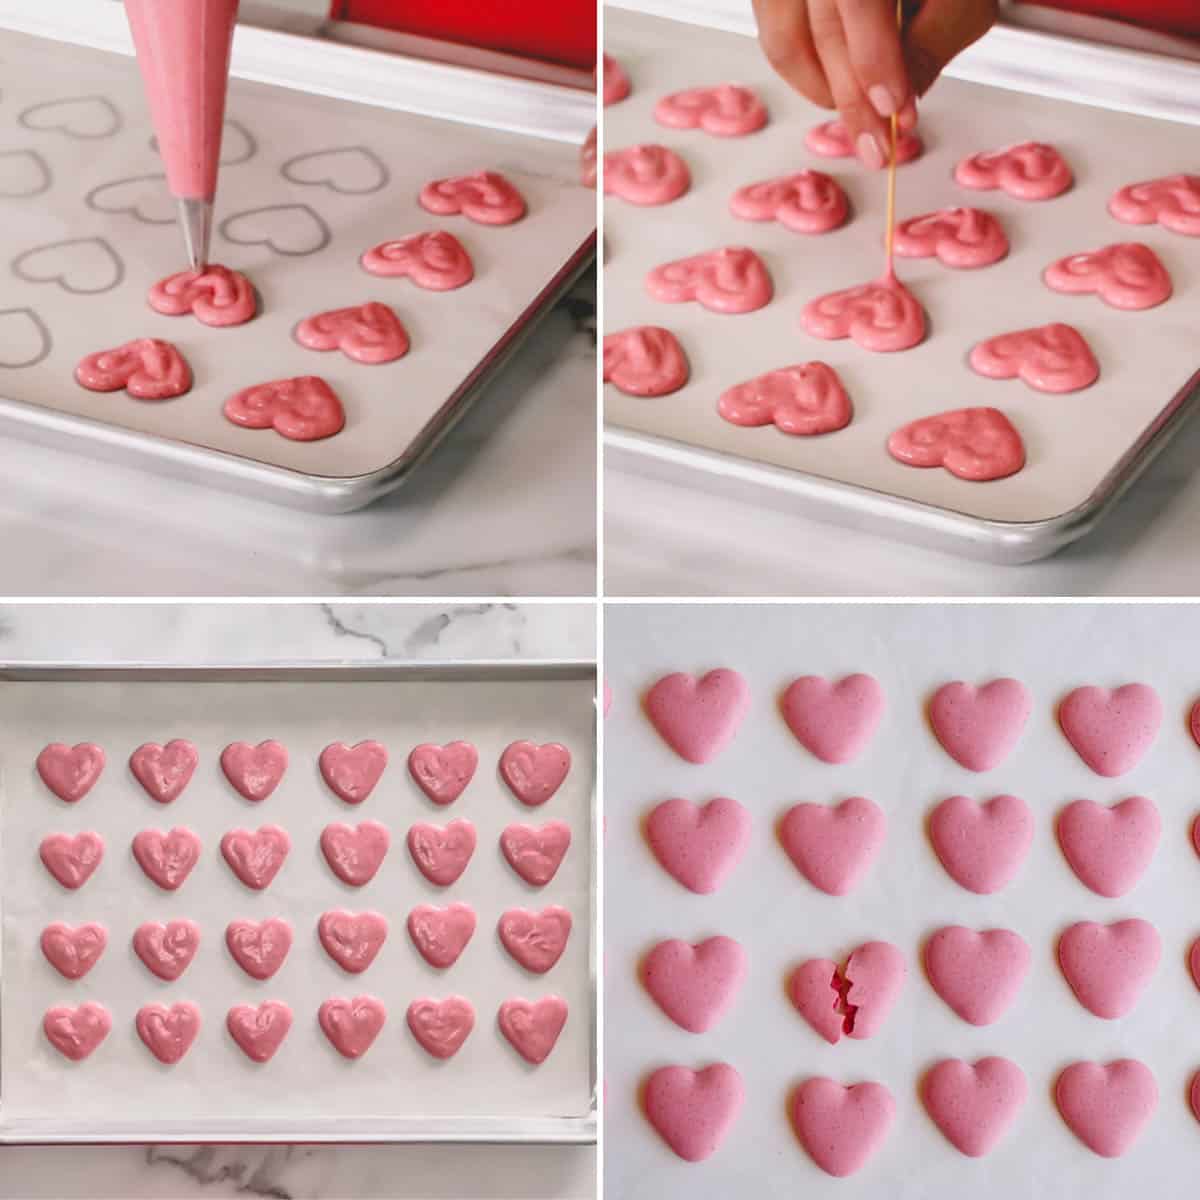 Step by step photos of piping heart macaron shells.